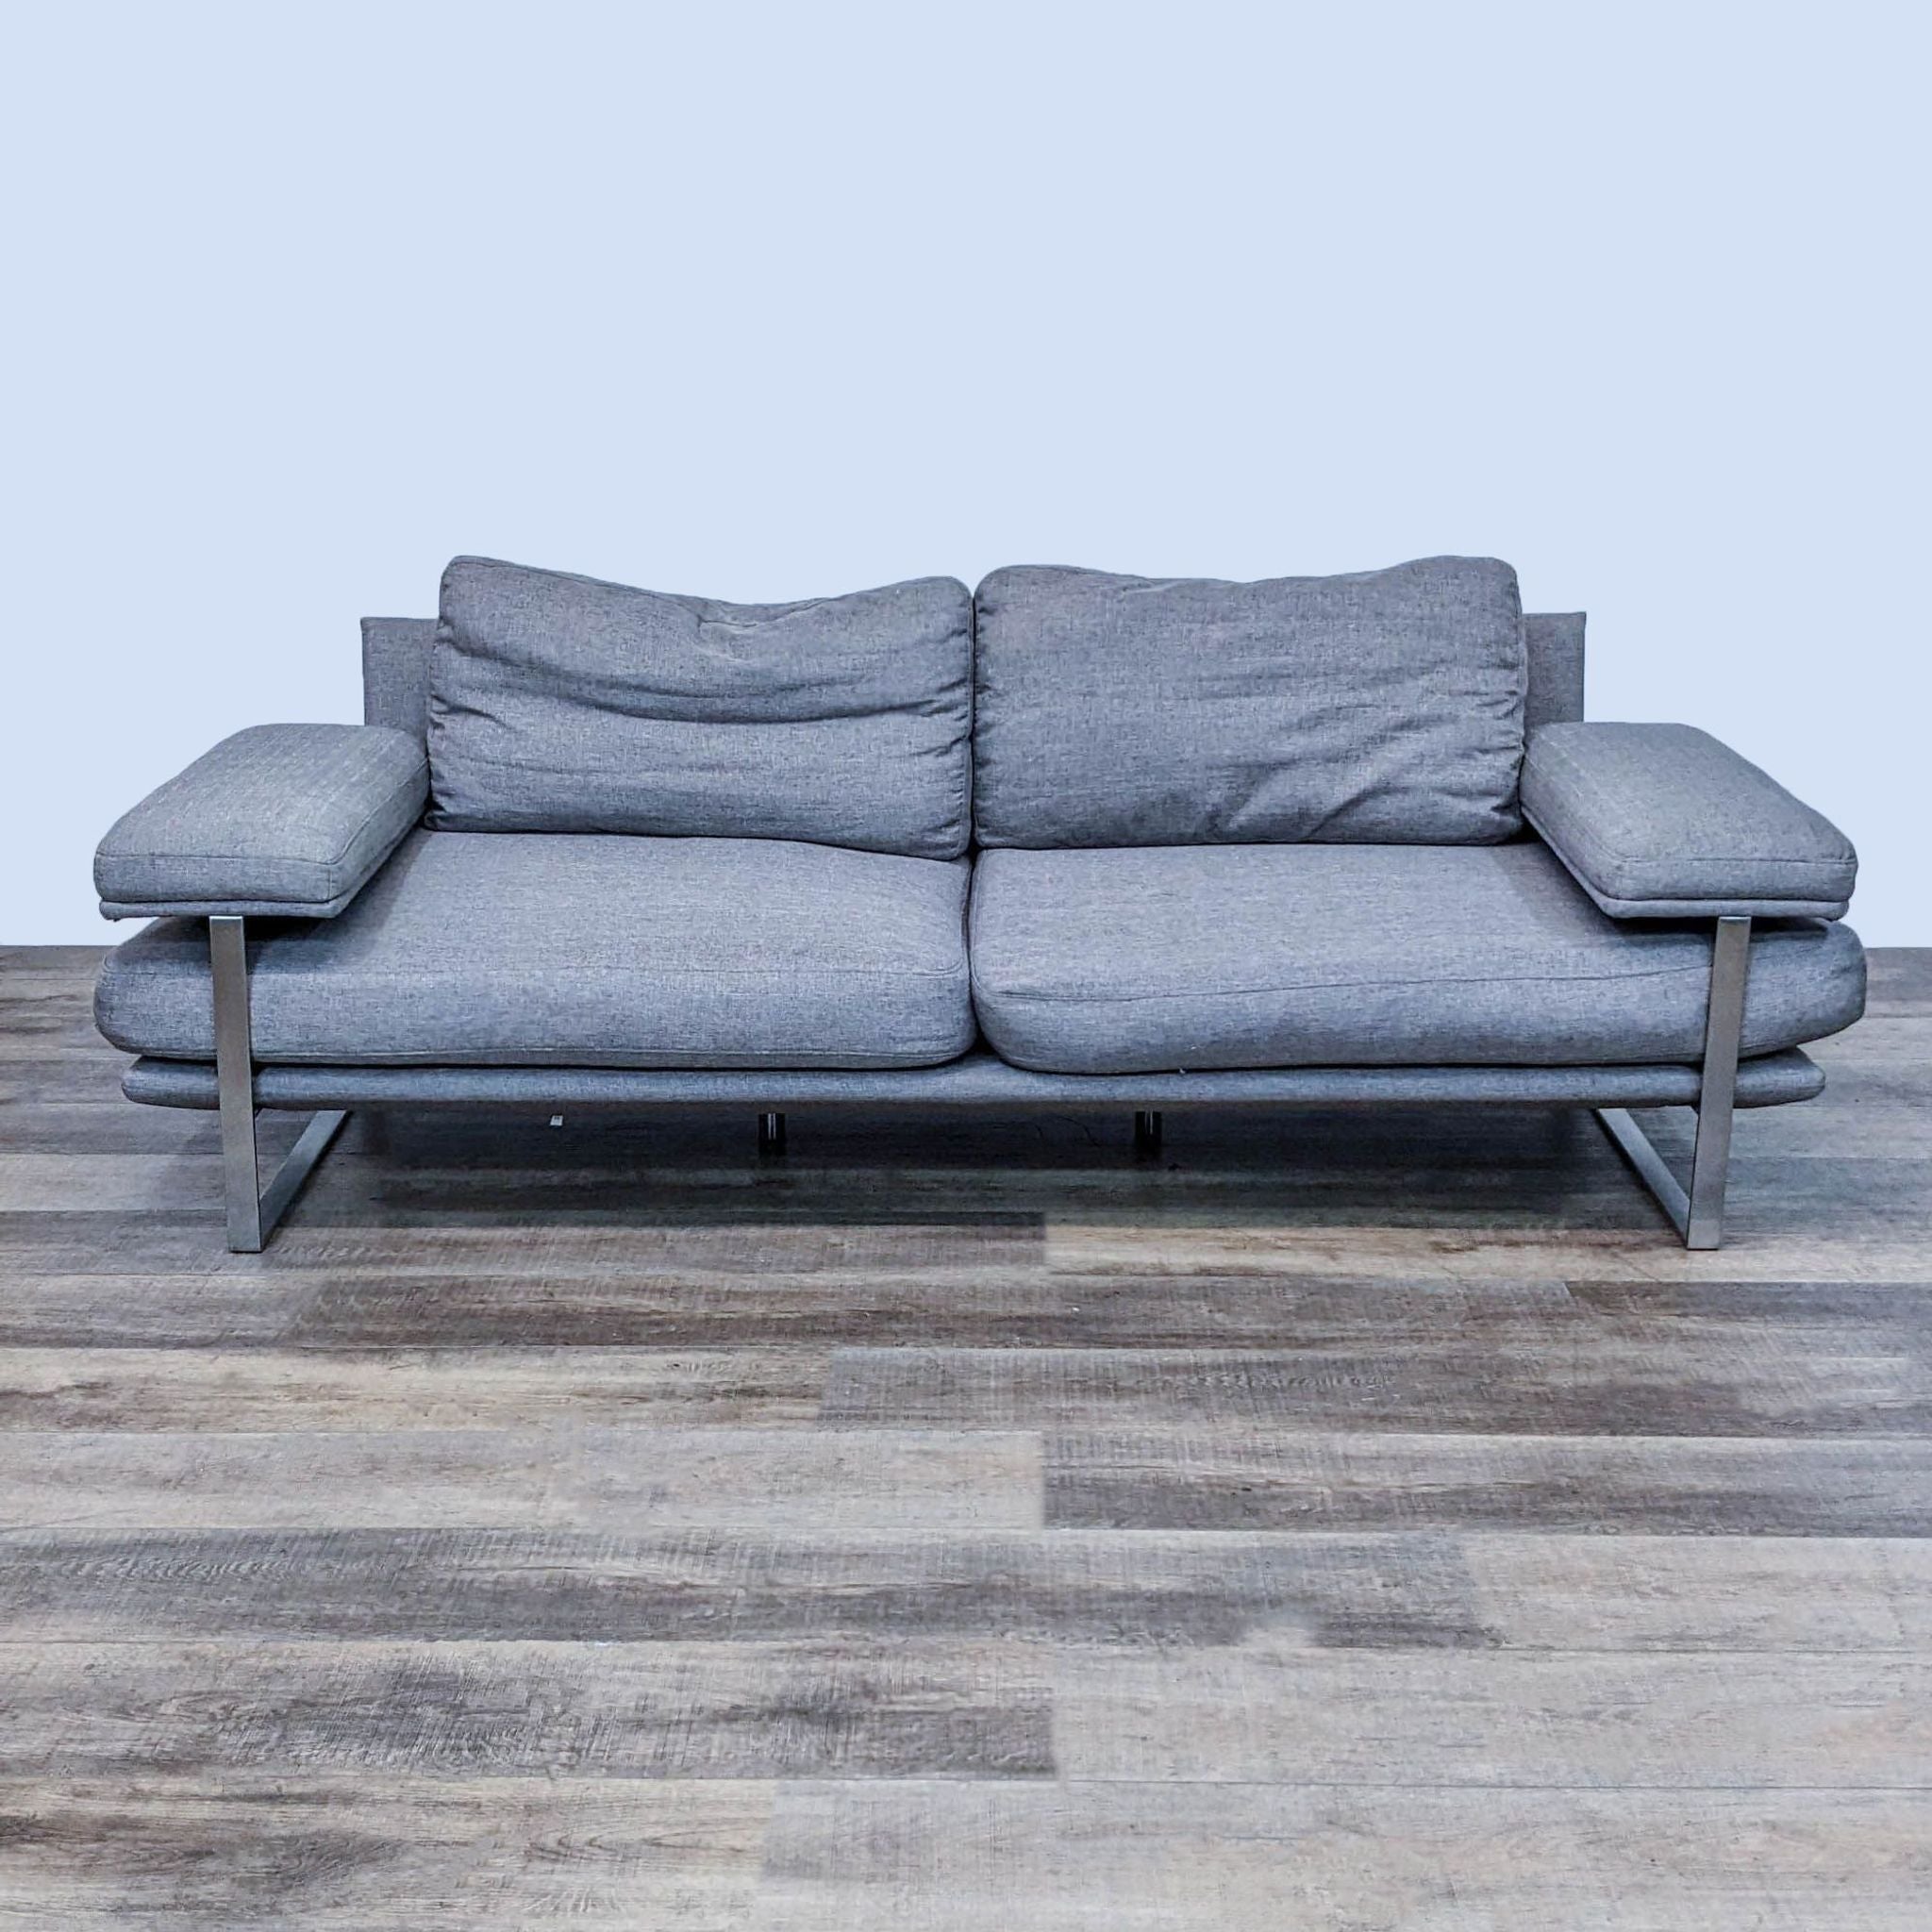 Reperch brand 3-seat upholstered sofa in gray with brushed chrome frame, frontal view on wooden floor.